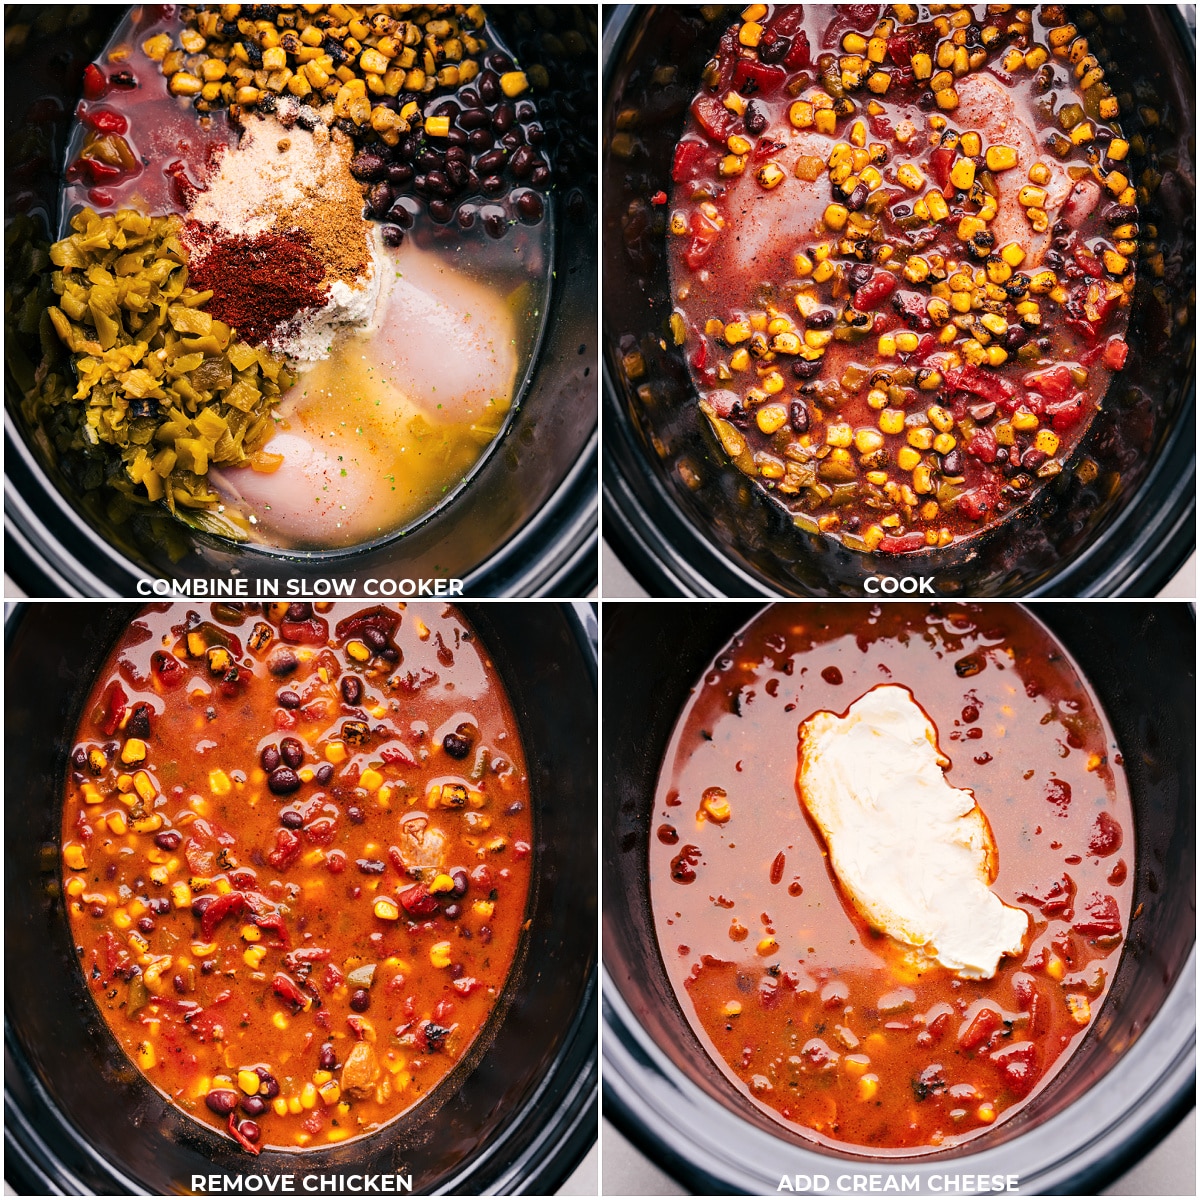 All the ingredients being added to the slow cooker and it all being cooked for this crack chicken chili.